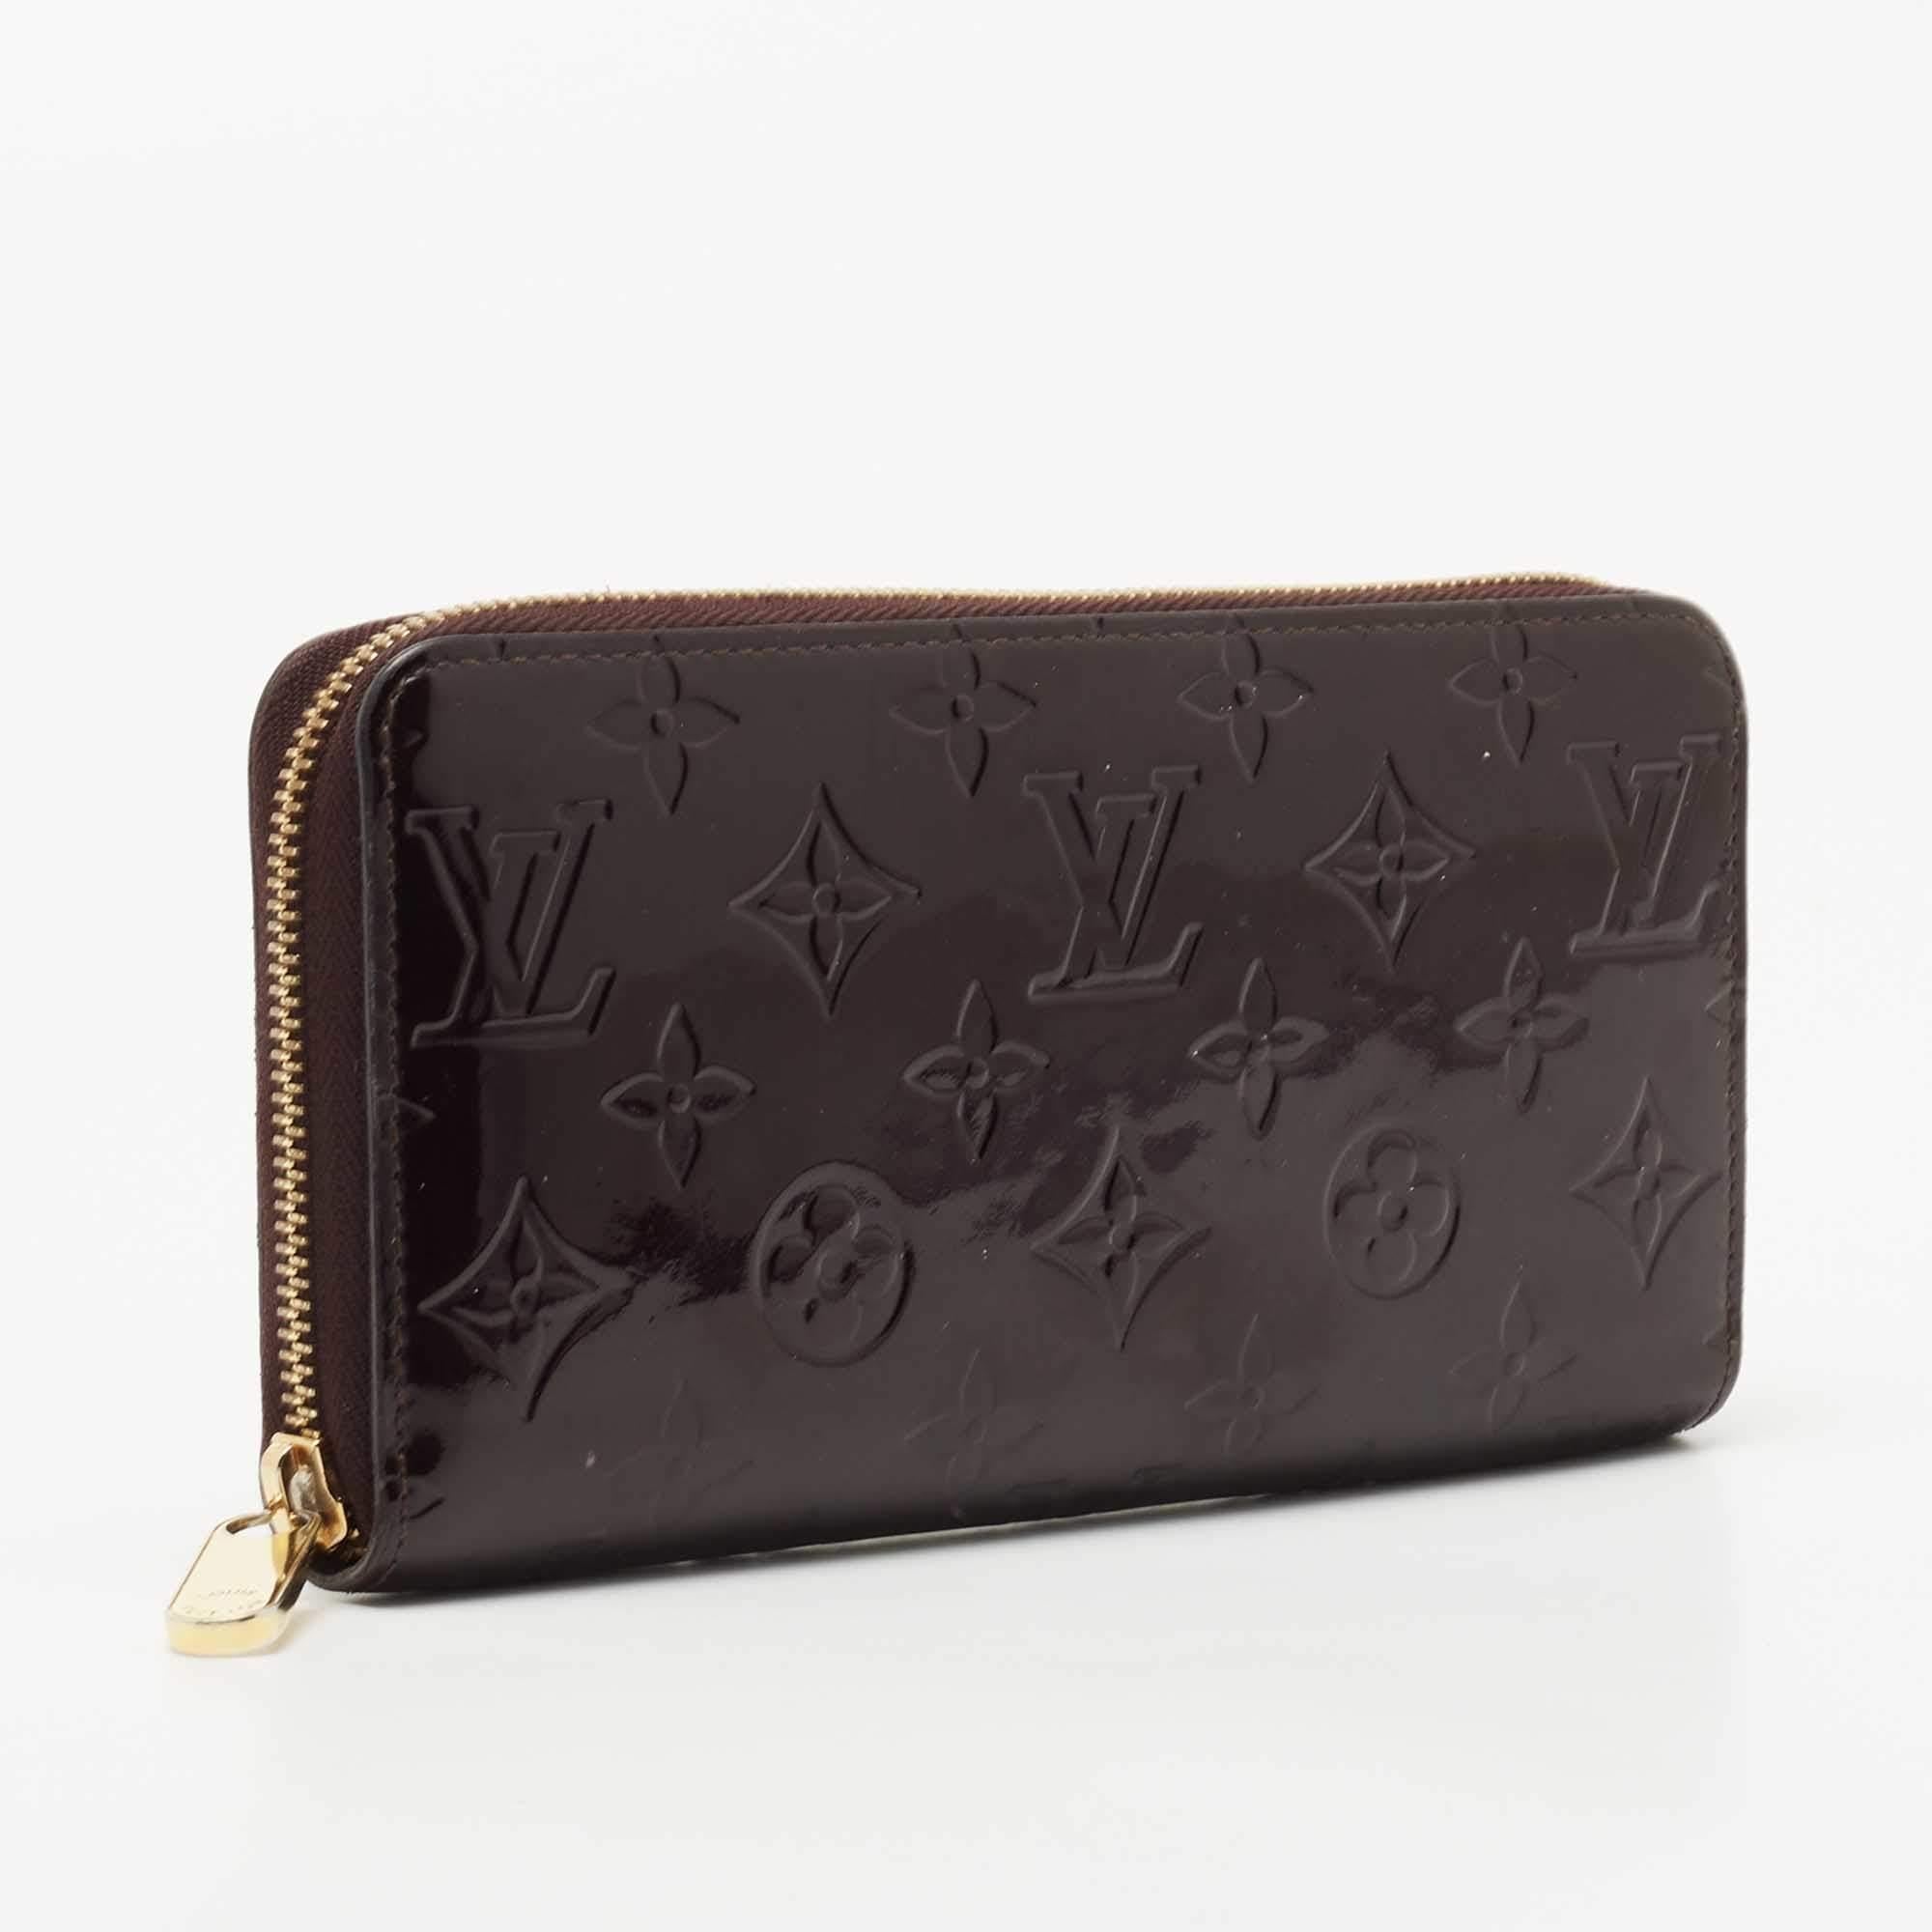 With a rich heritage and meticulous workmanship, each creation of Louis Vuitton is sure to impress you with its notable features. This Zippy wallet is conveniently designed for everyday use. Crafted from Amarante Monogram Vernis, it is paired with a